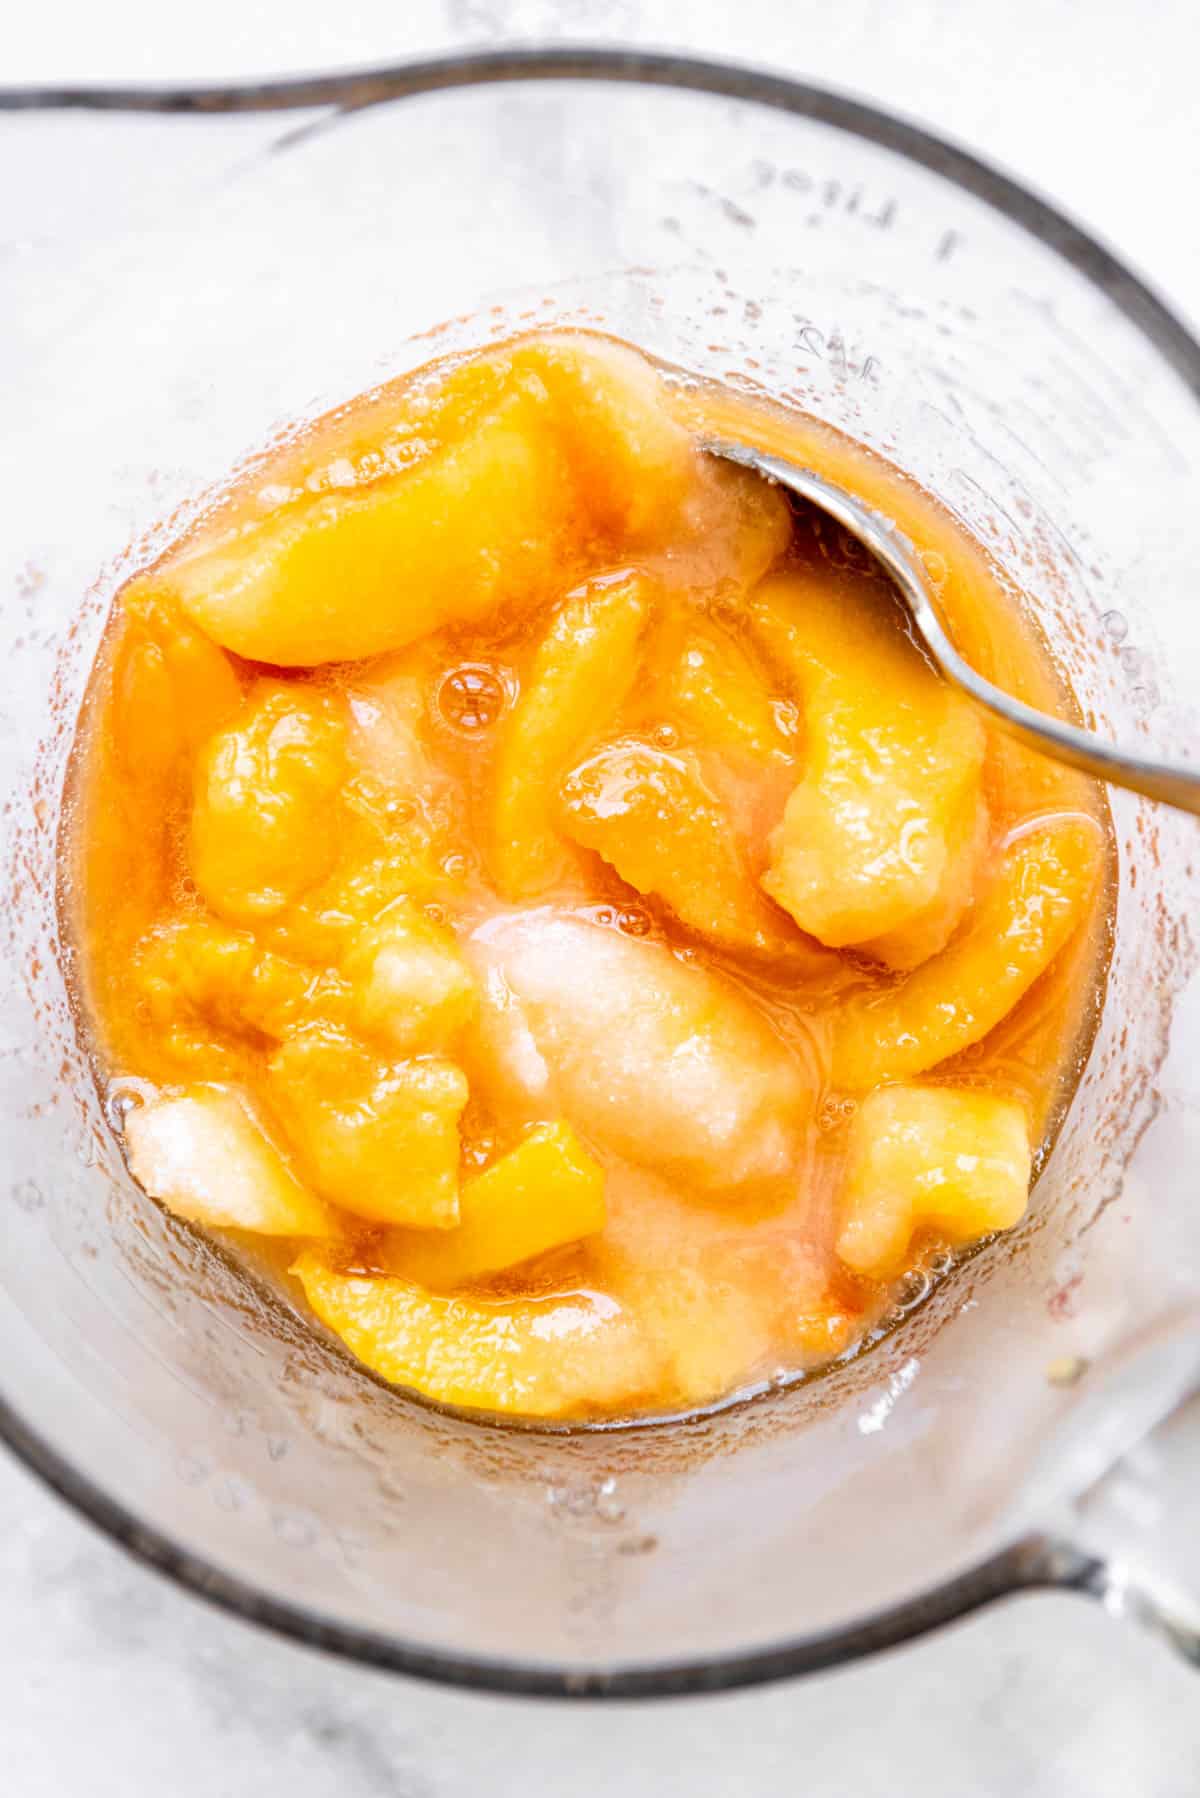 A bowl of sliced peaches with sugar to draw out the juices.